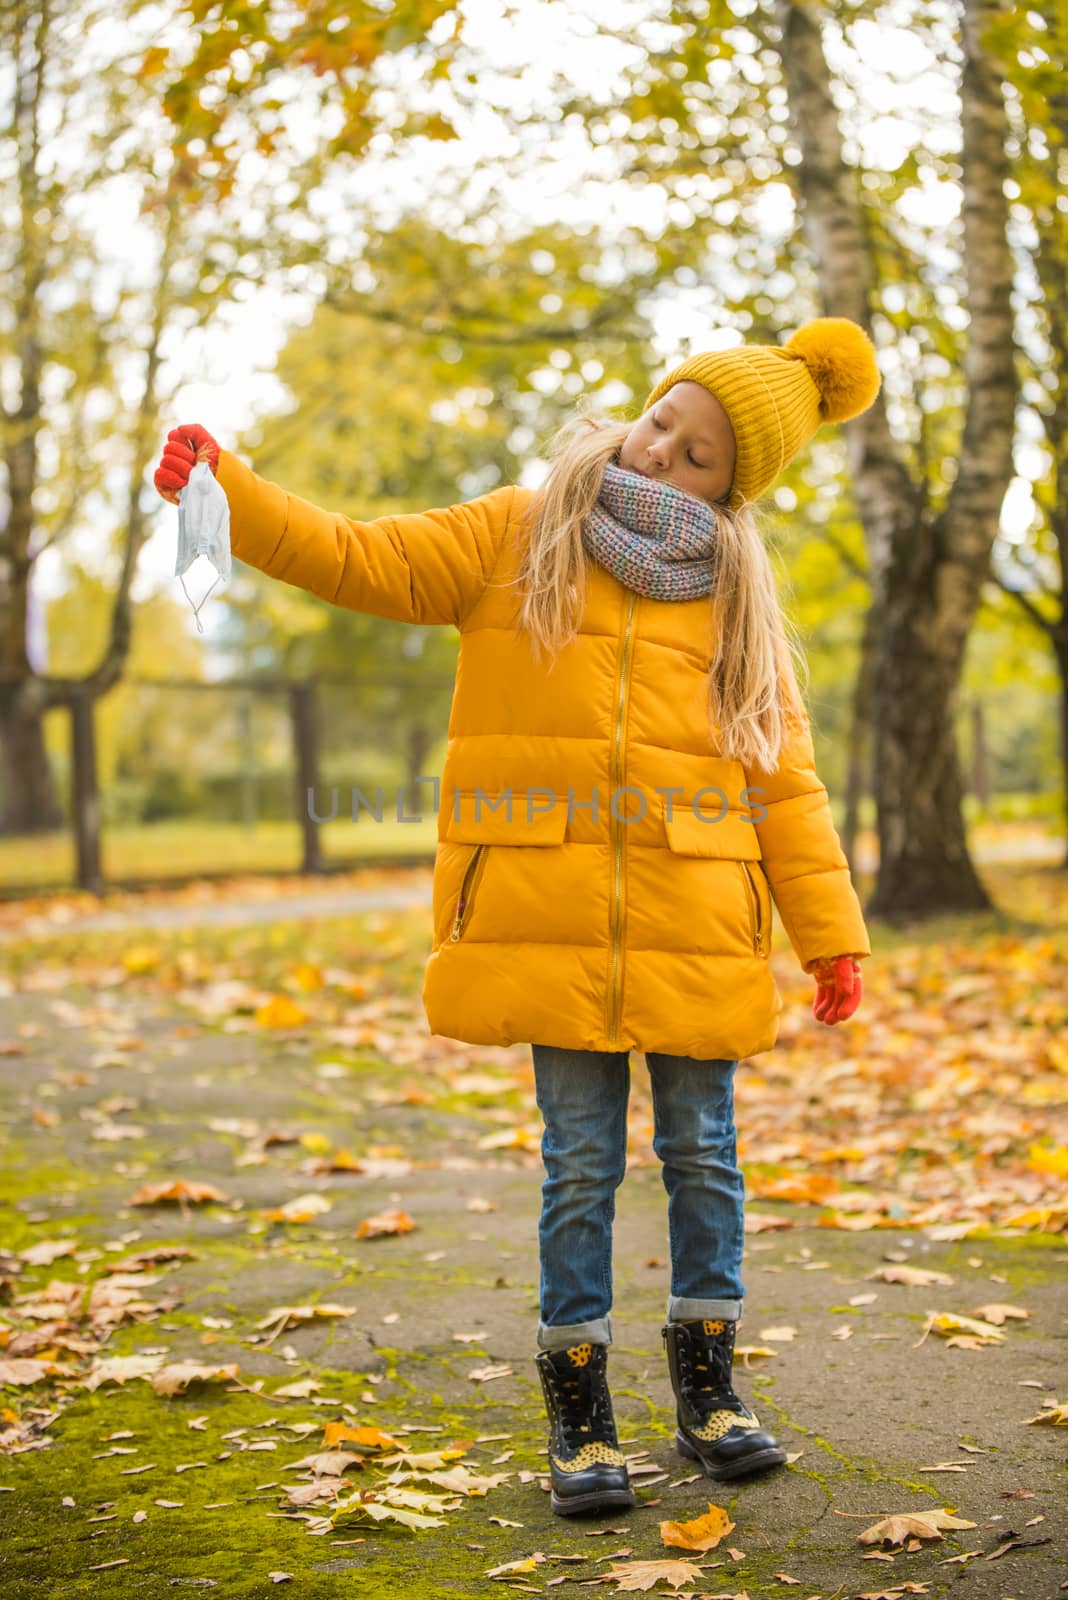 Little girl with blond hair wearing respirator mask in autumn background in yellow clothing